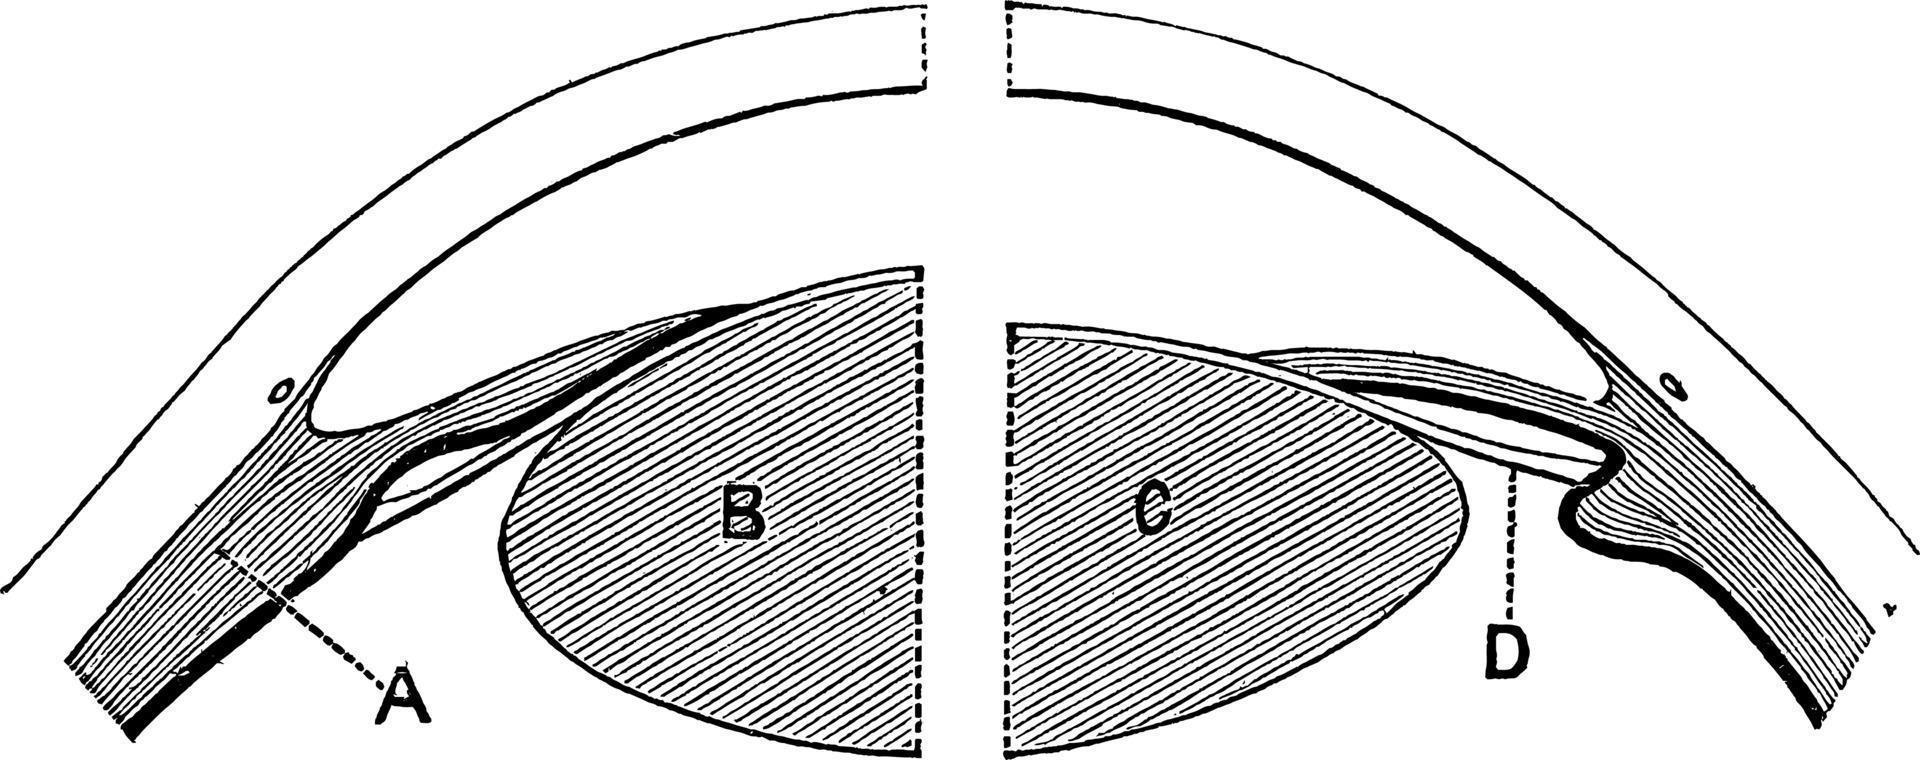 Lens of the eye or Change in the Lens during Accomadation, vintage illustration. vector